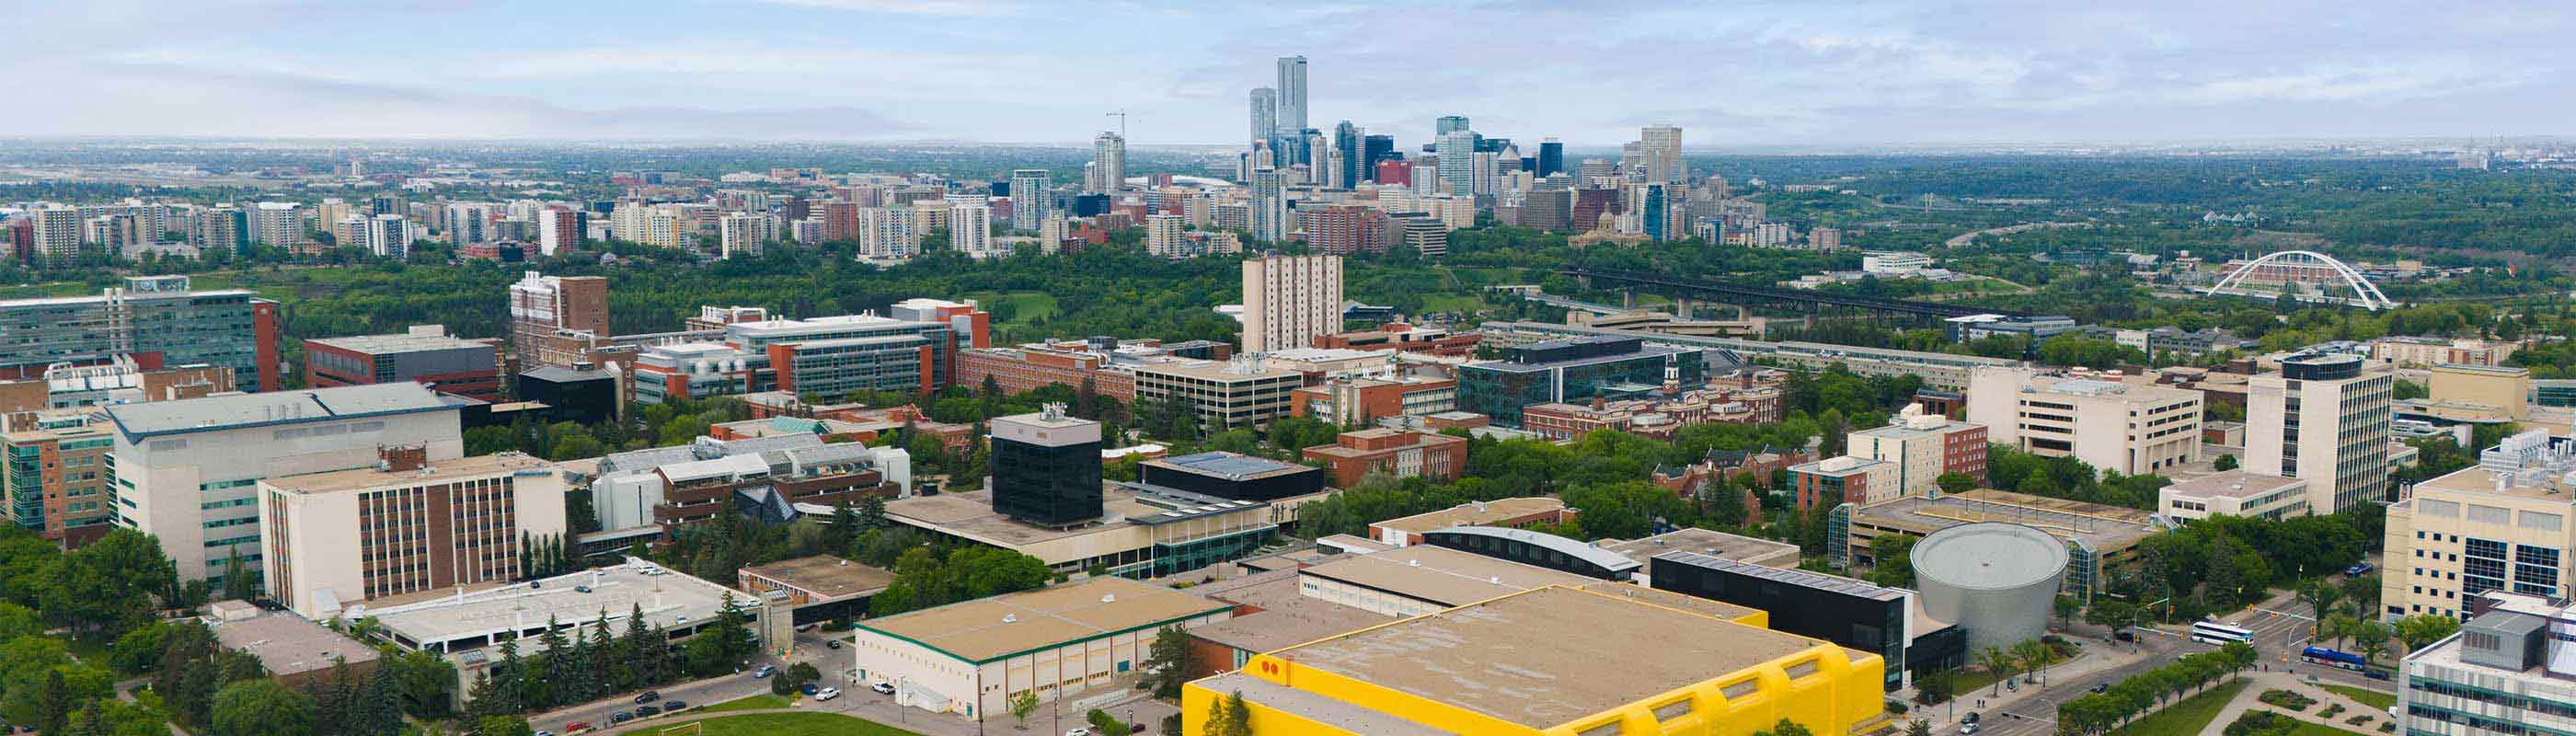 Aerial view of the University of Alberta north campus and downtown Edmonton